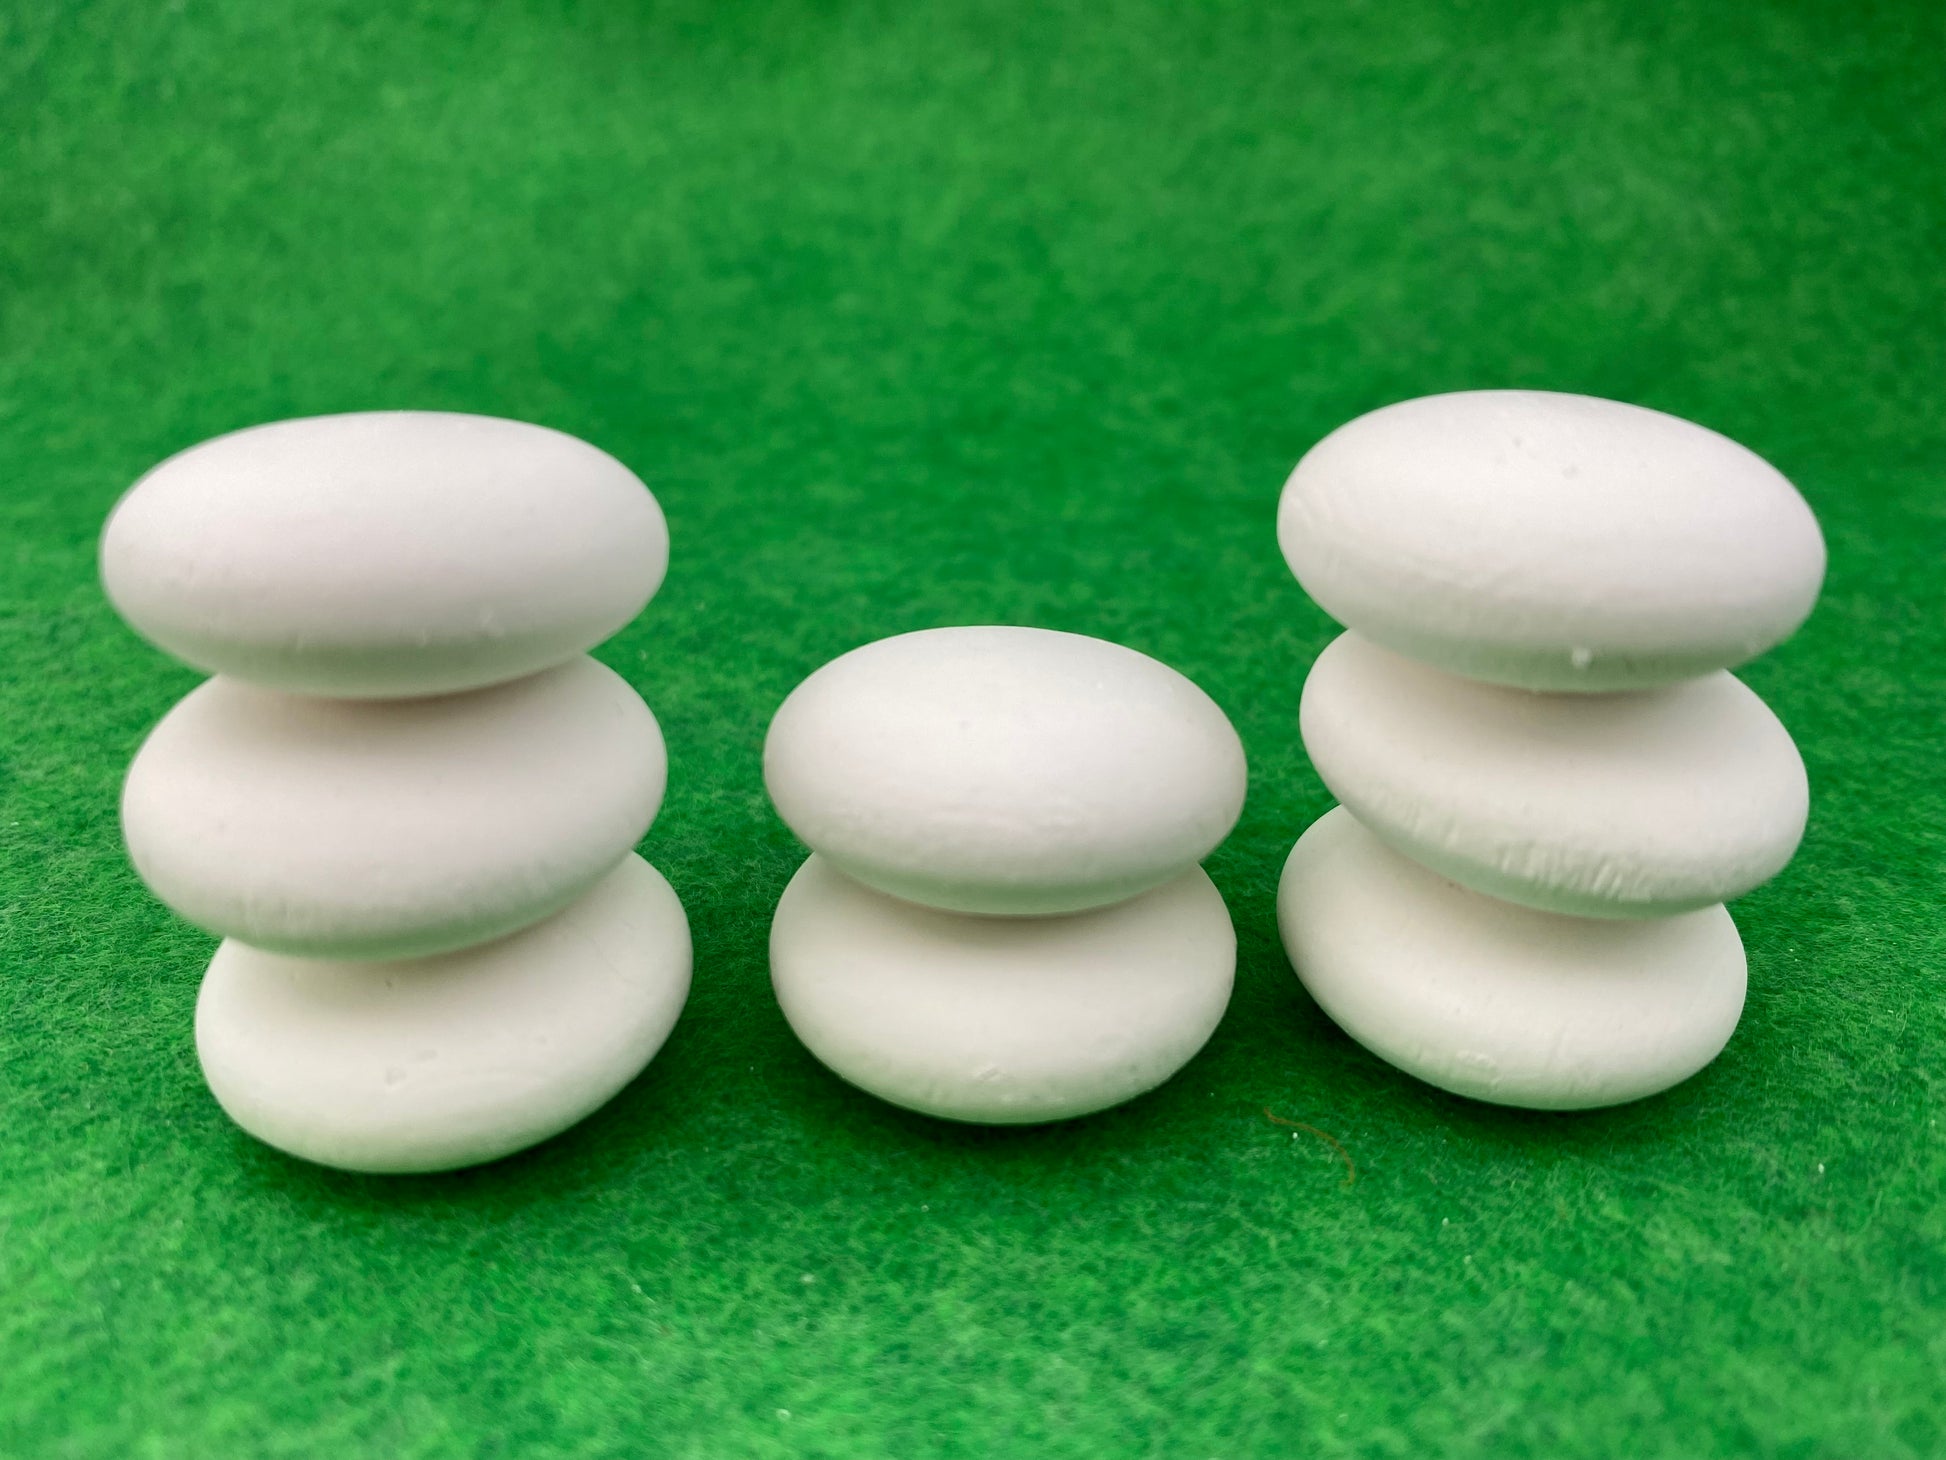 8 tiny white circular plaster pebbles stacked on top of each other